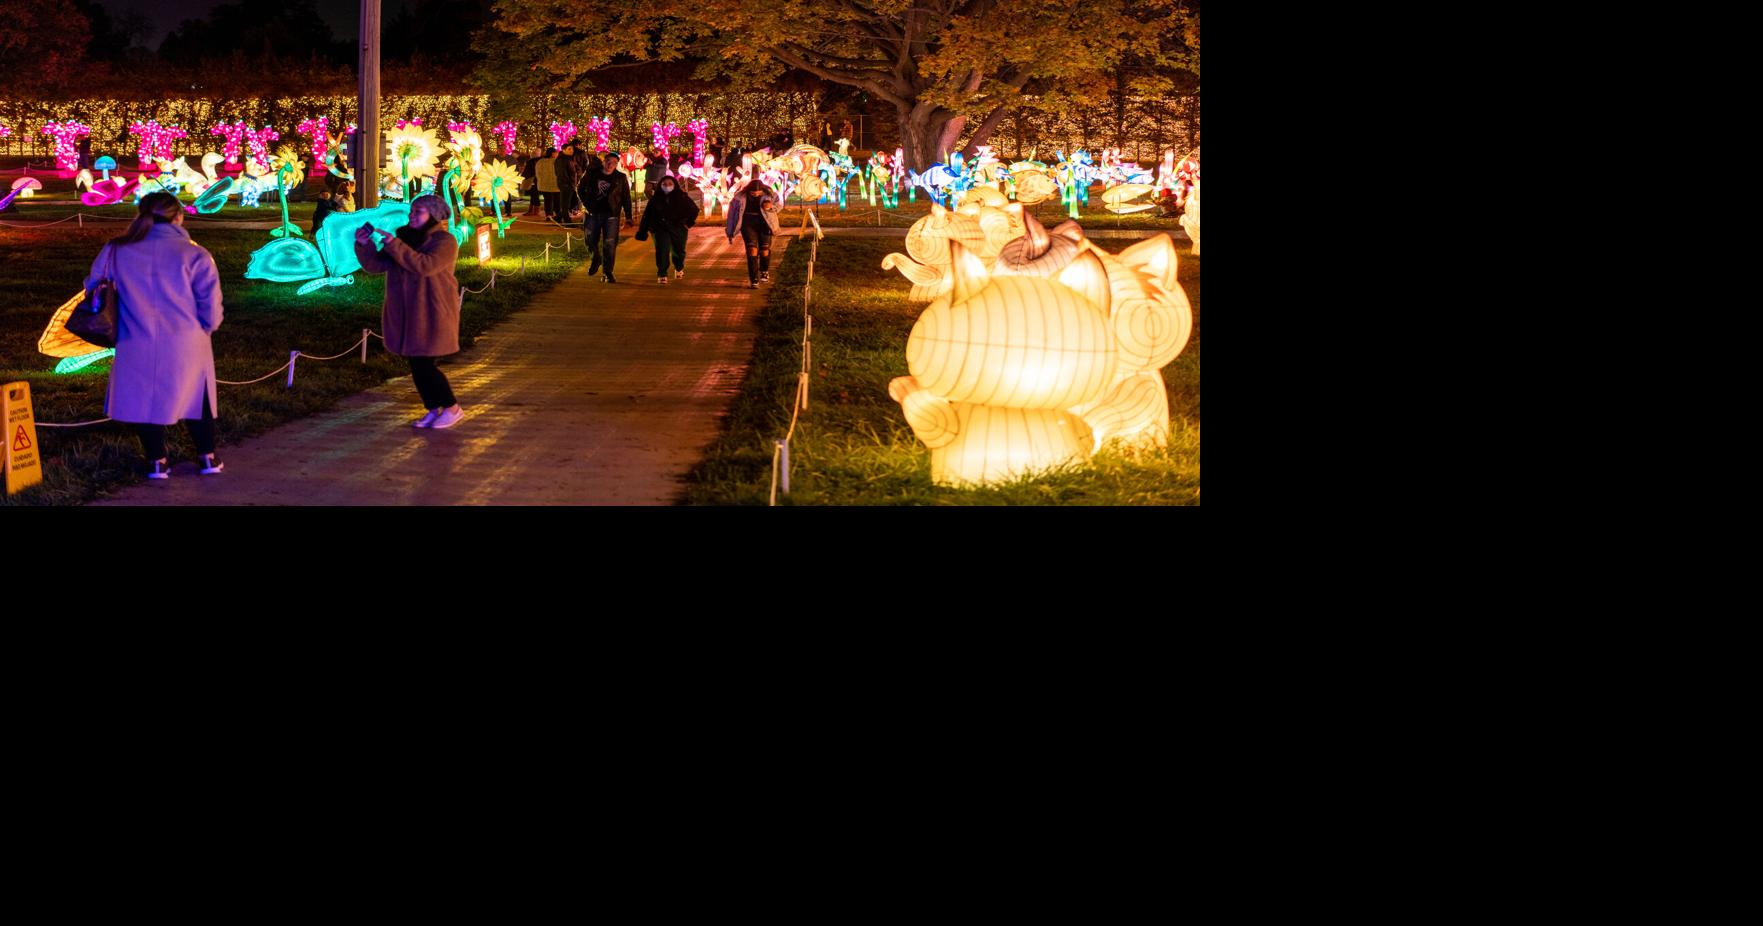 Winter Lantern Festival coming to County in November News